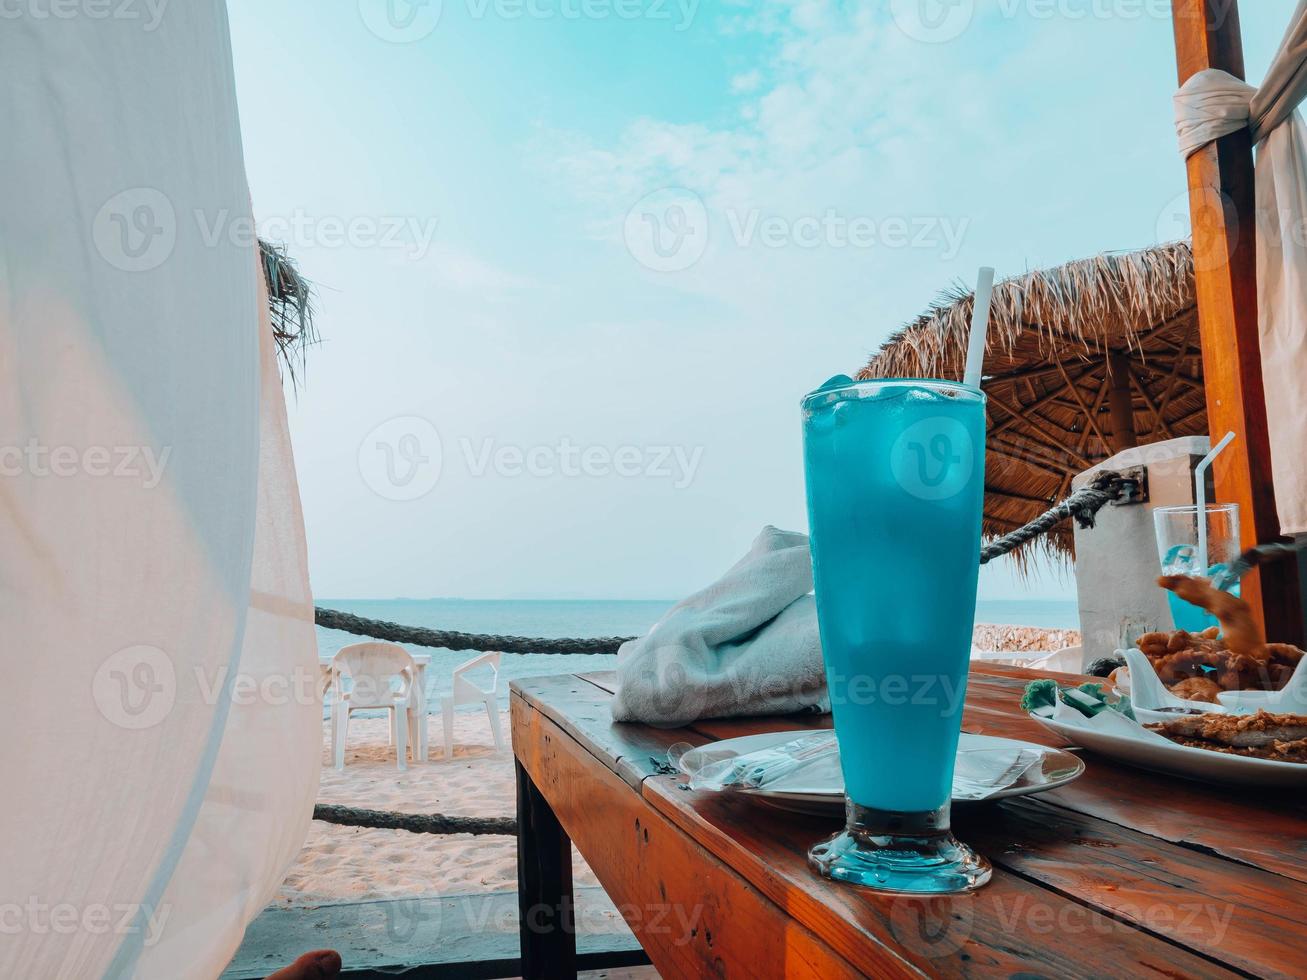 Travel beach summer season time umbrella soft drink blue Hawaii beverage glass juice cool water sea sand sun ocean sky outdoor relax fruit natural event party happy holiday luxury tourism refreshment photo